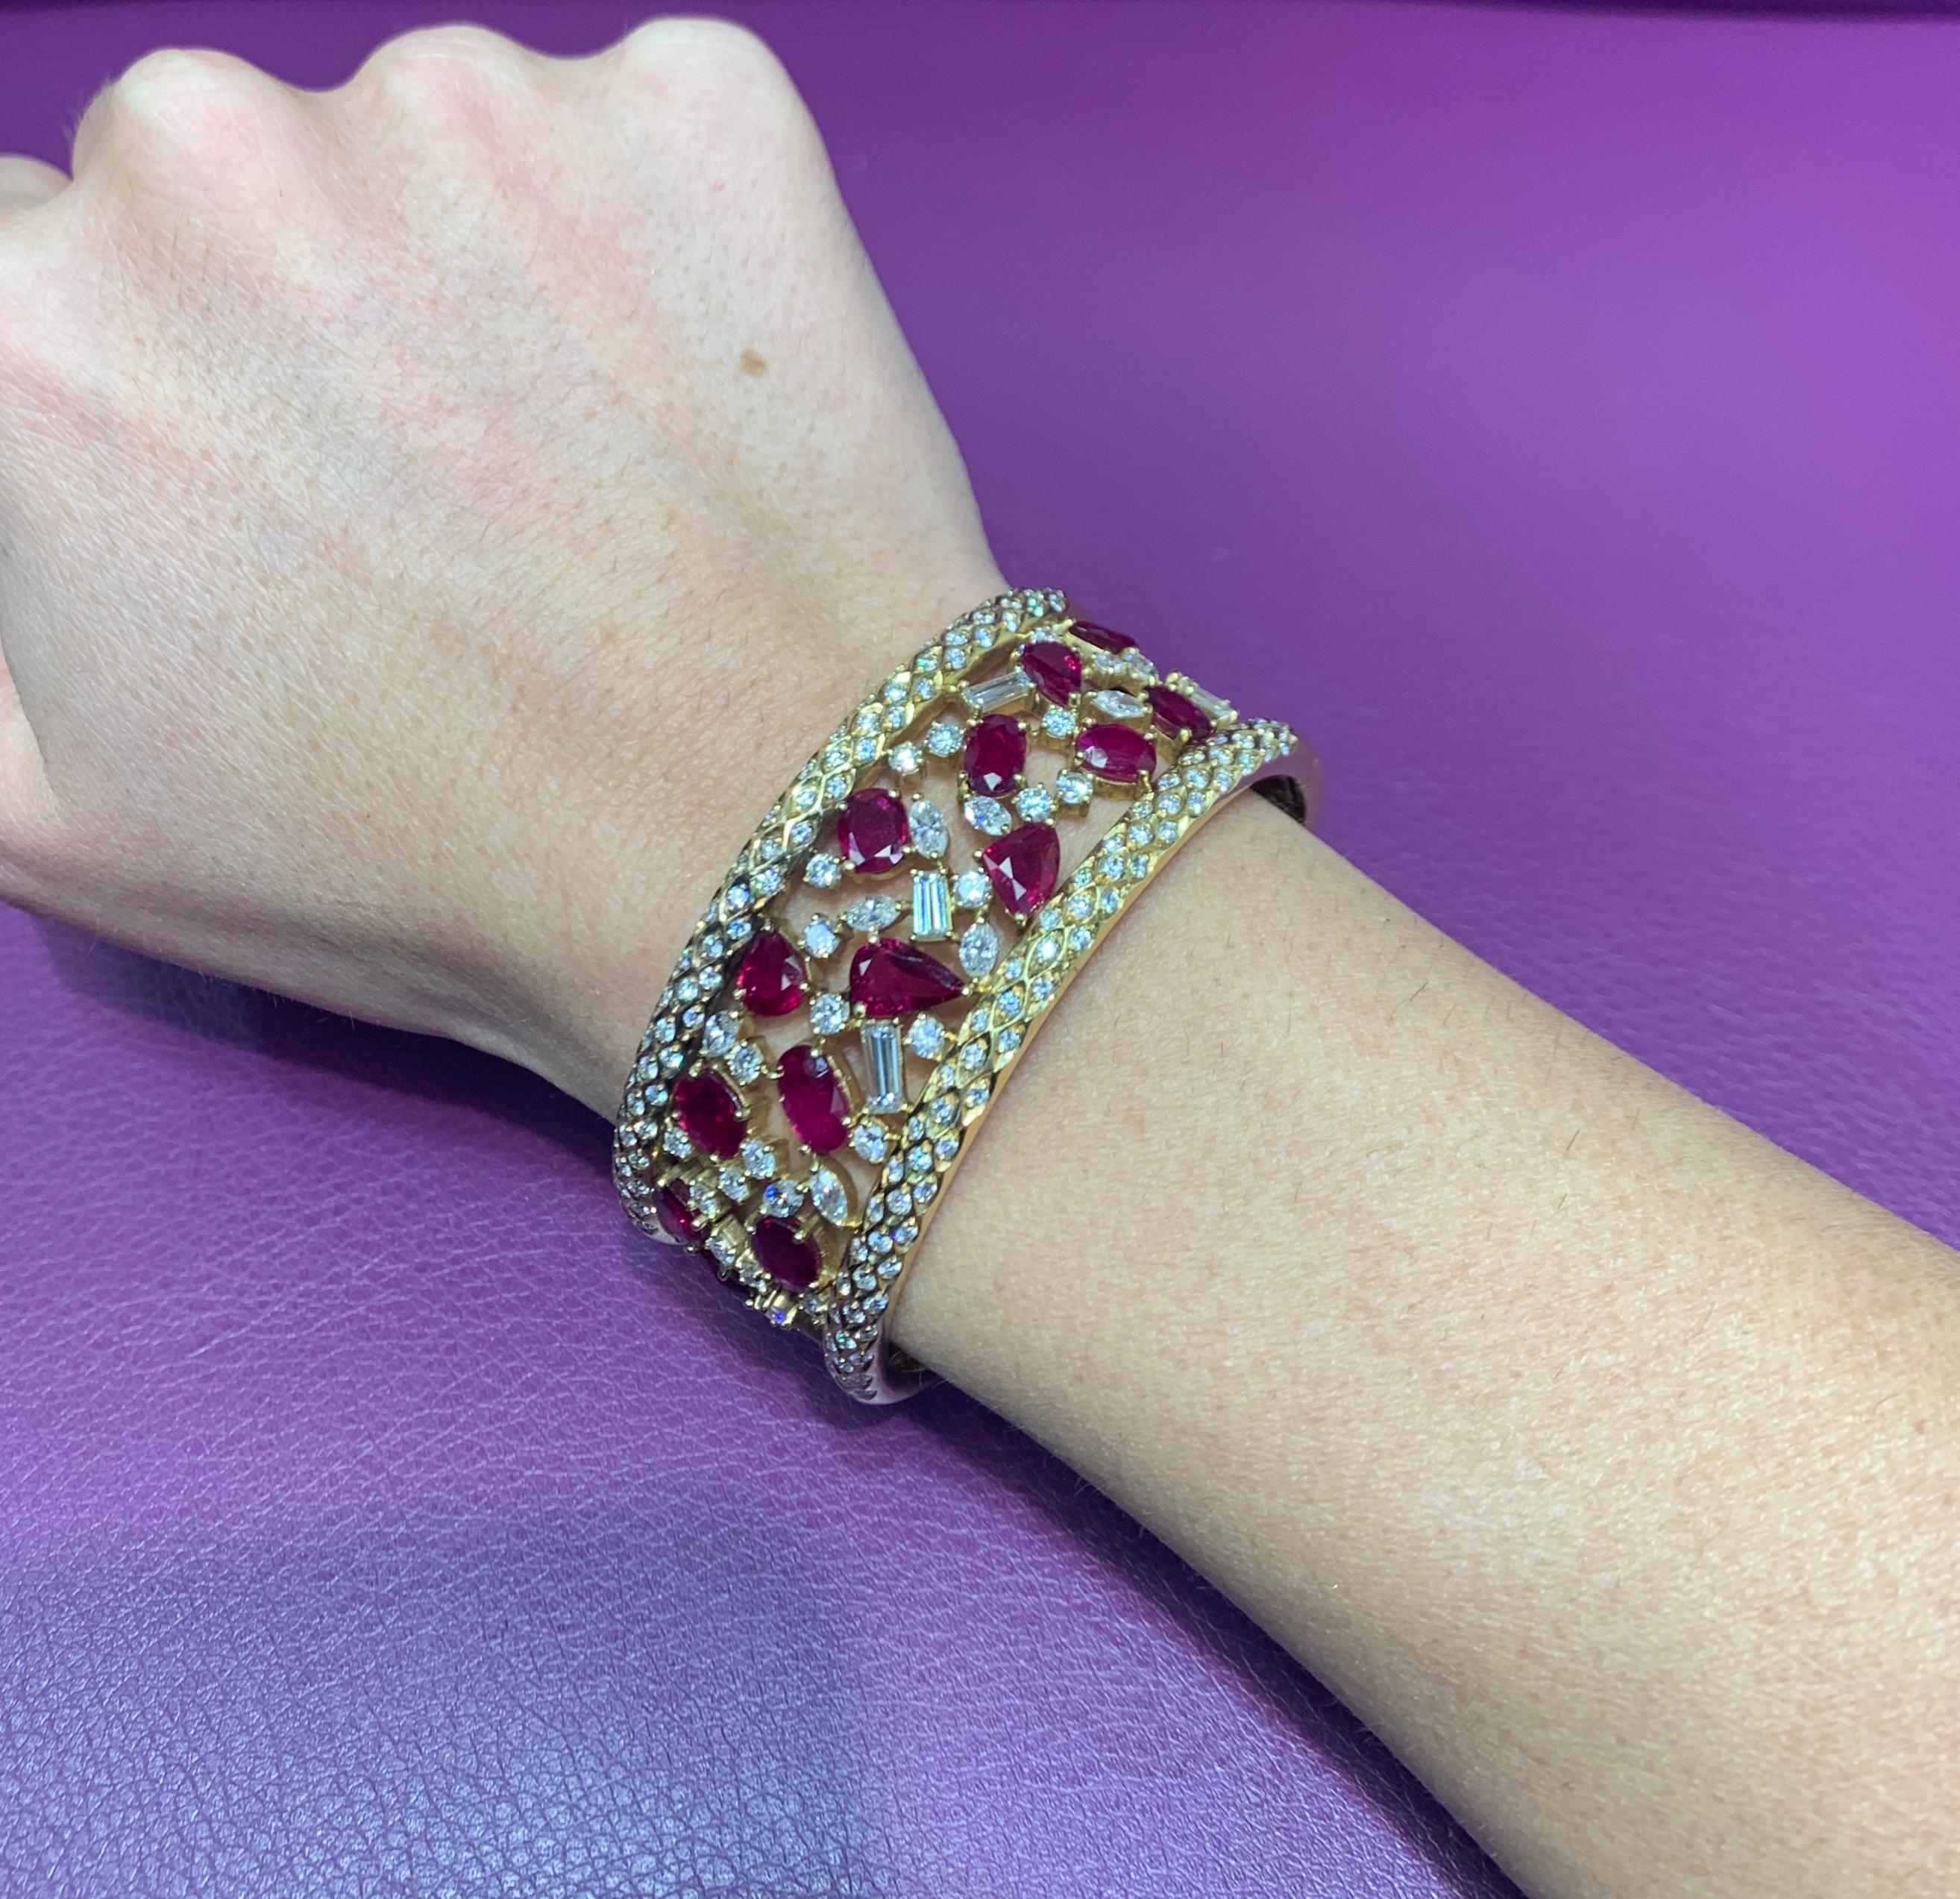 Ruby & Diamond Gold Bangle Bracelet 
14 rubies weigh approximately 7 carats
5 baguette diamonds, 10 marquise diamonds, 25 round diamonds, 128 pave diamonds altogether weigh approximately 5 carats
Measurements: 2.25